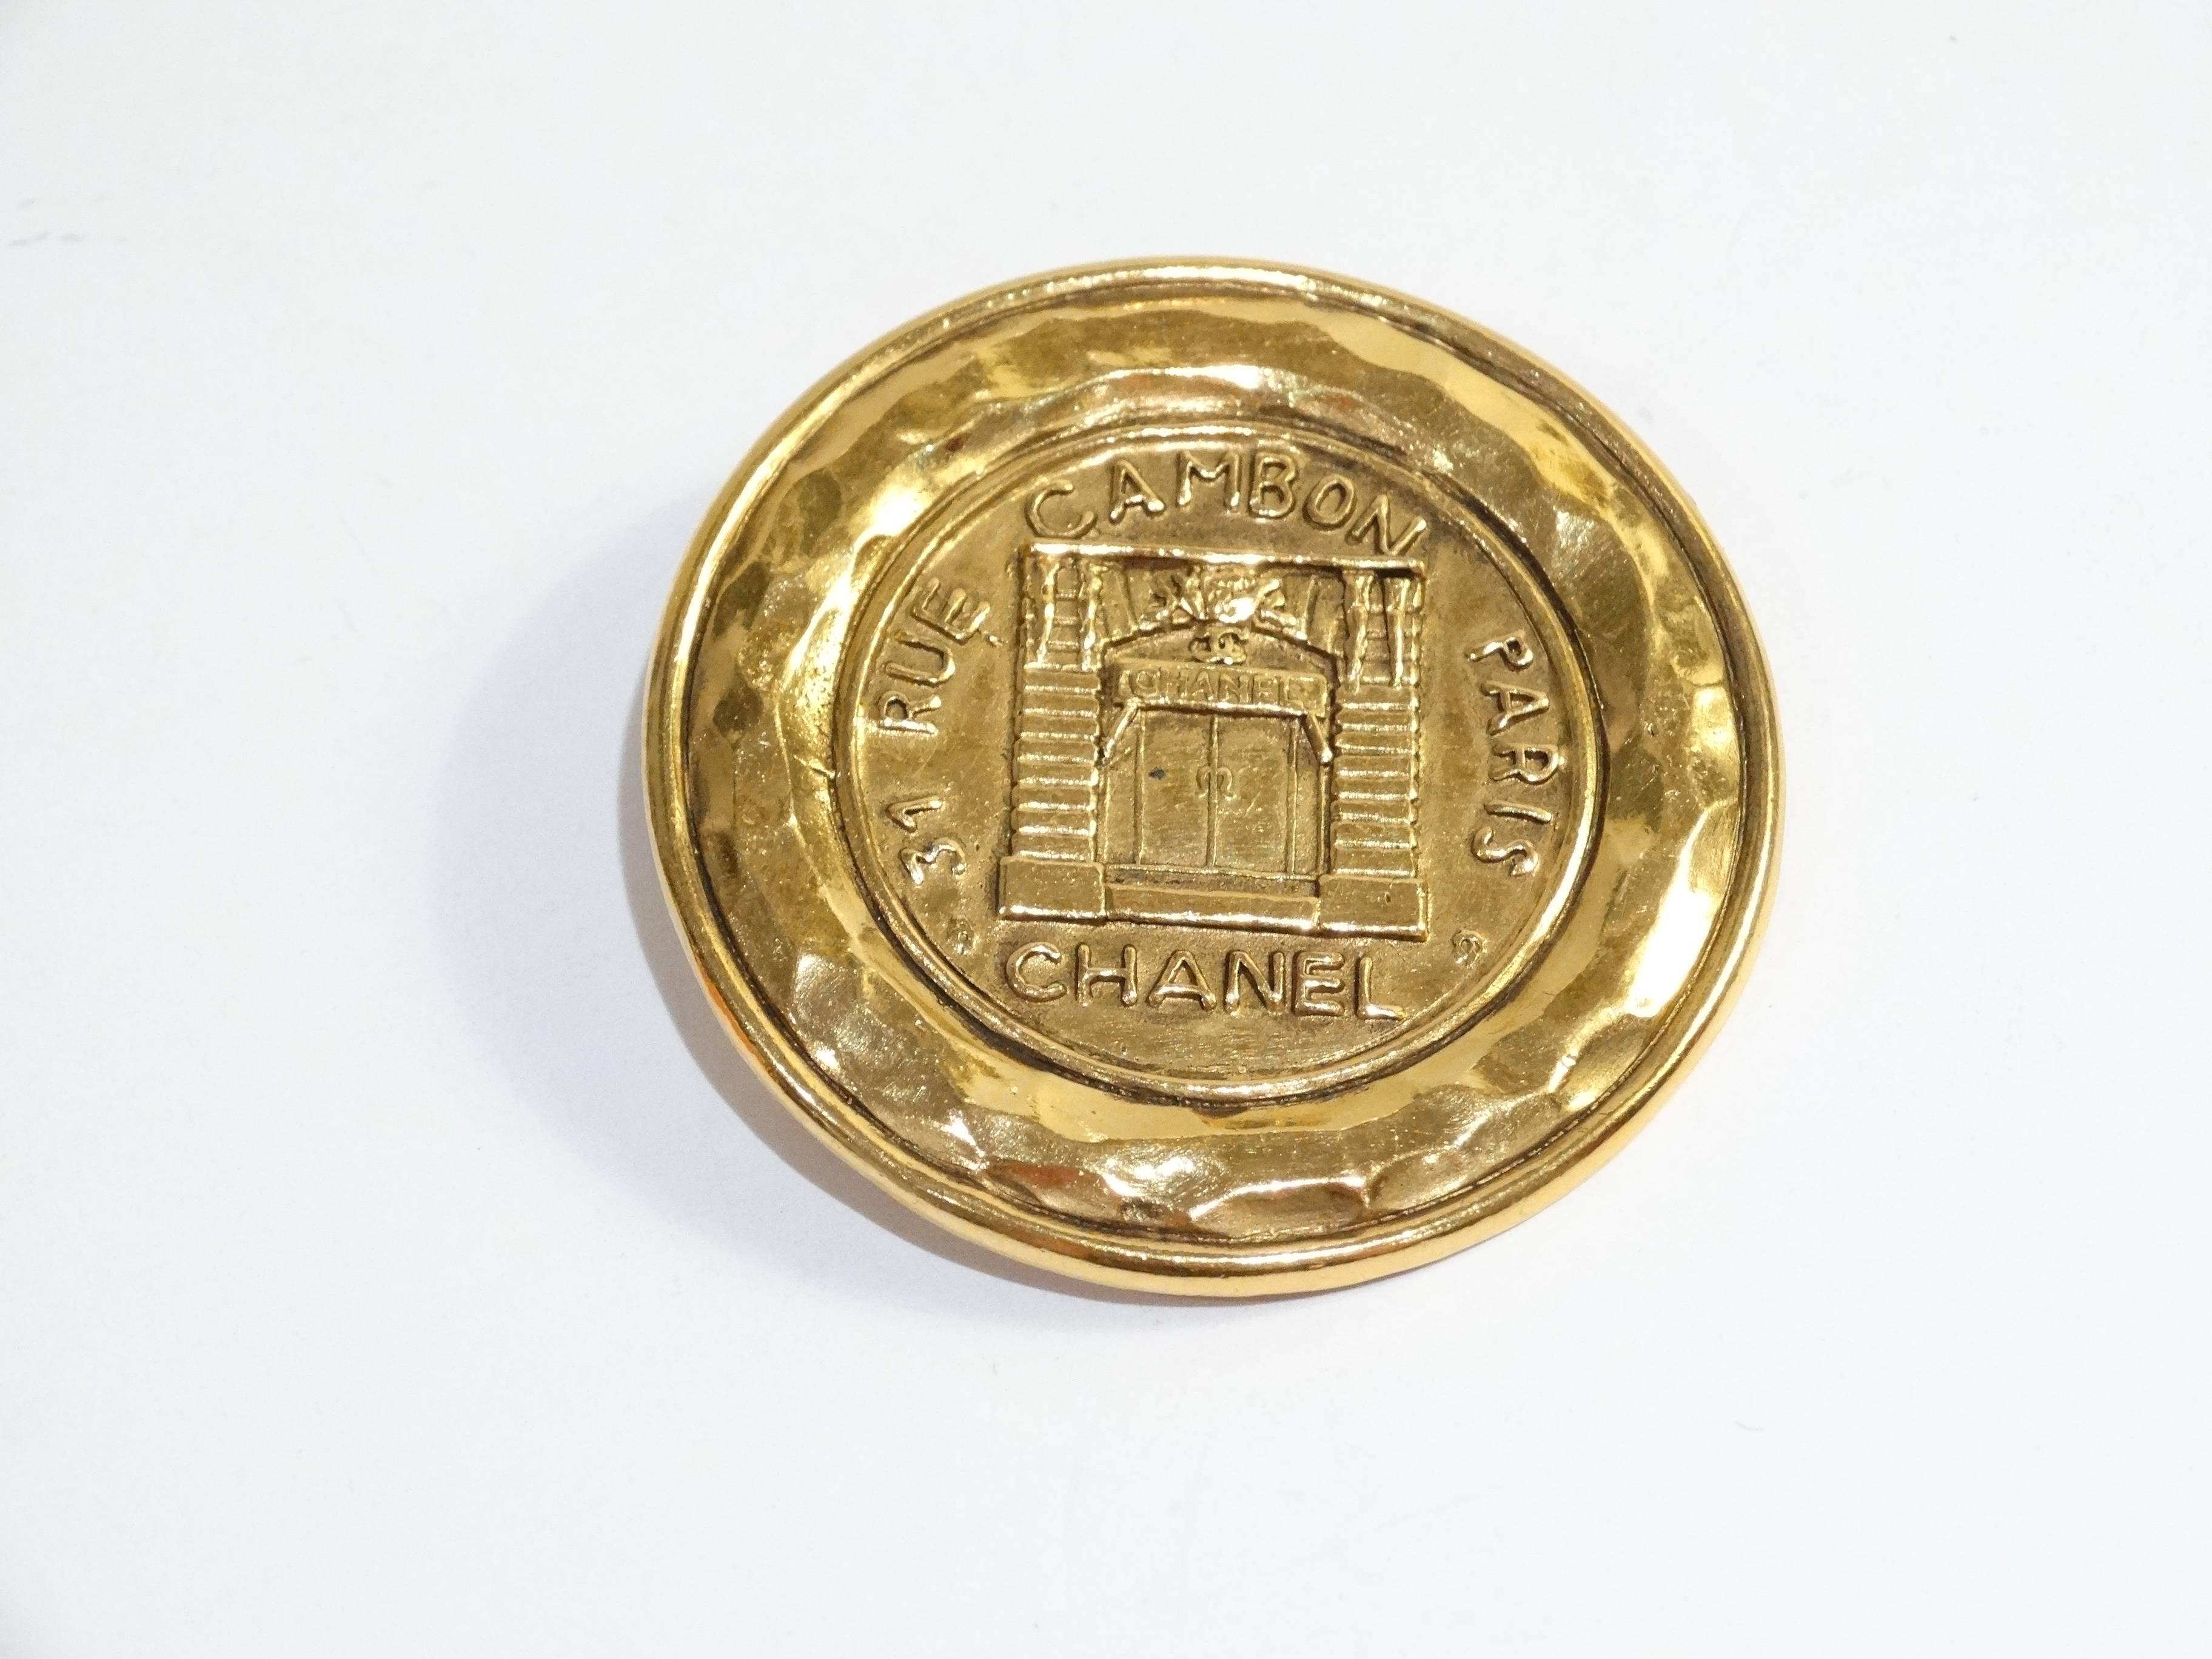 1980s Chanel 31 Rue Cambon Gold Medallion Brooch In Excellent Condition For Sale In Scottsdale, AZ